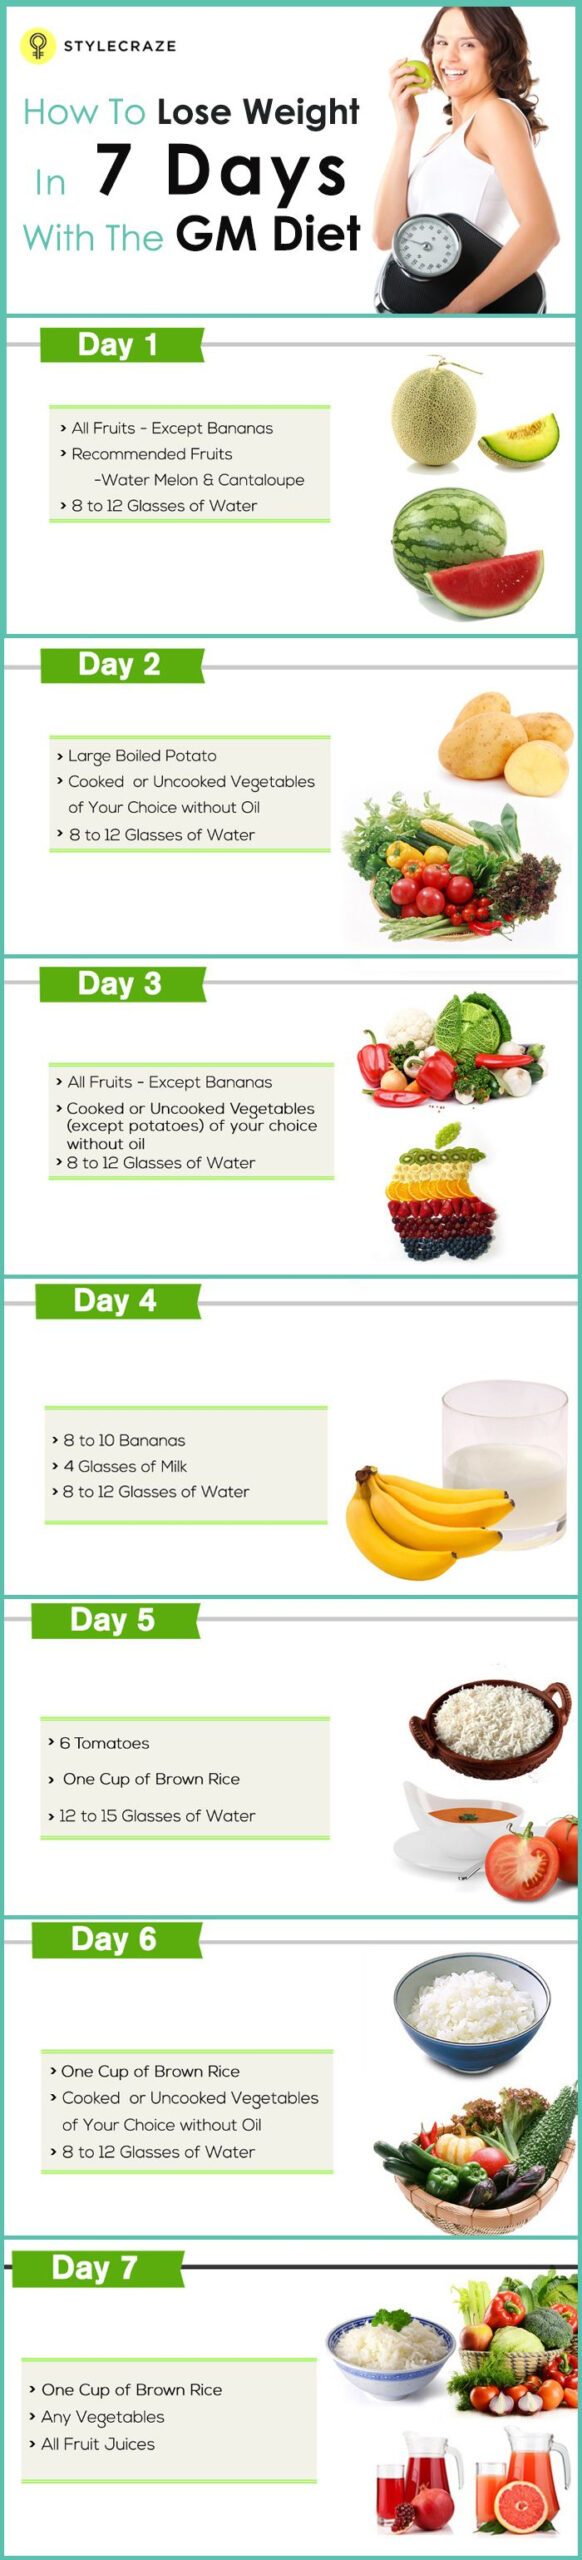 7 Day Diet Meal Plan To Lose Weight 1 Calories EatingWell Lose 